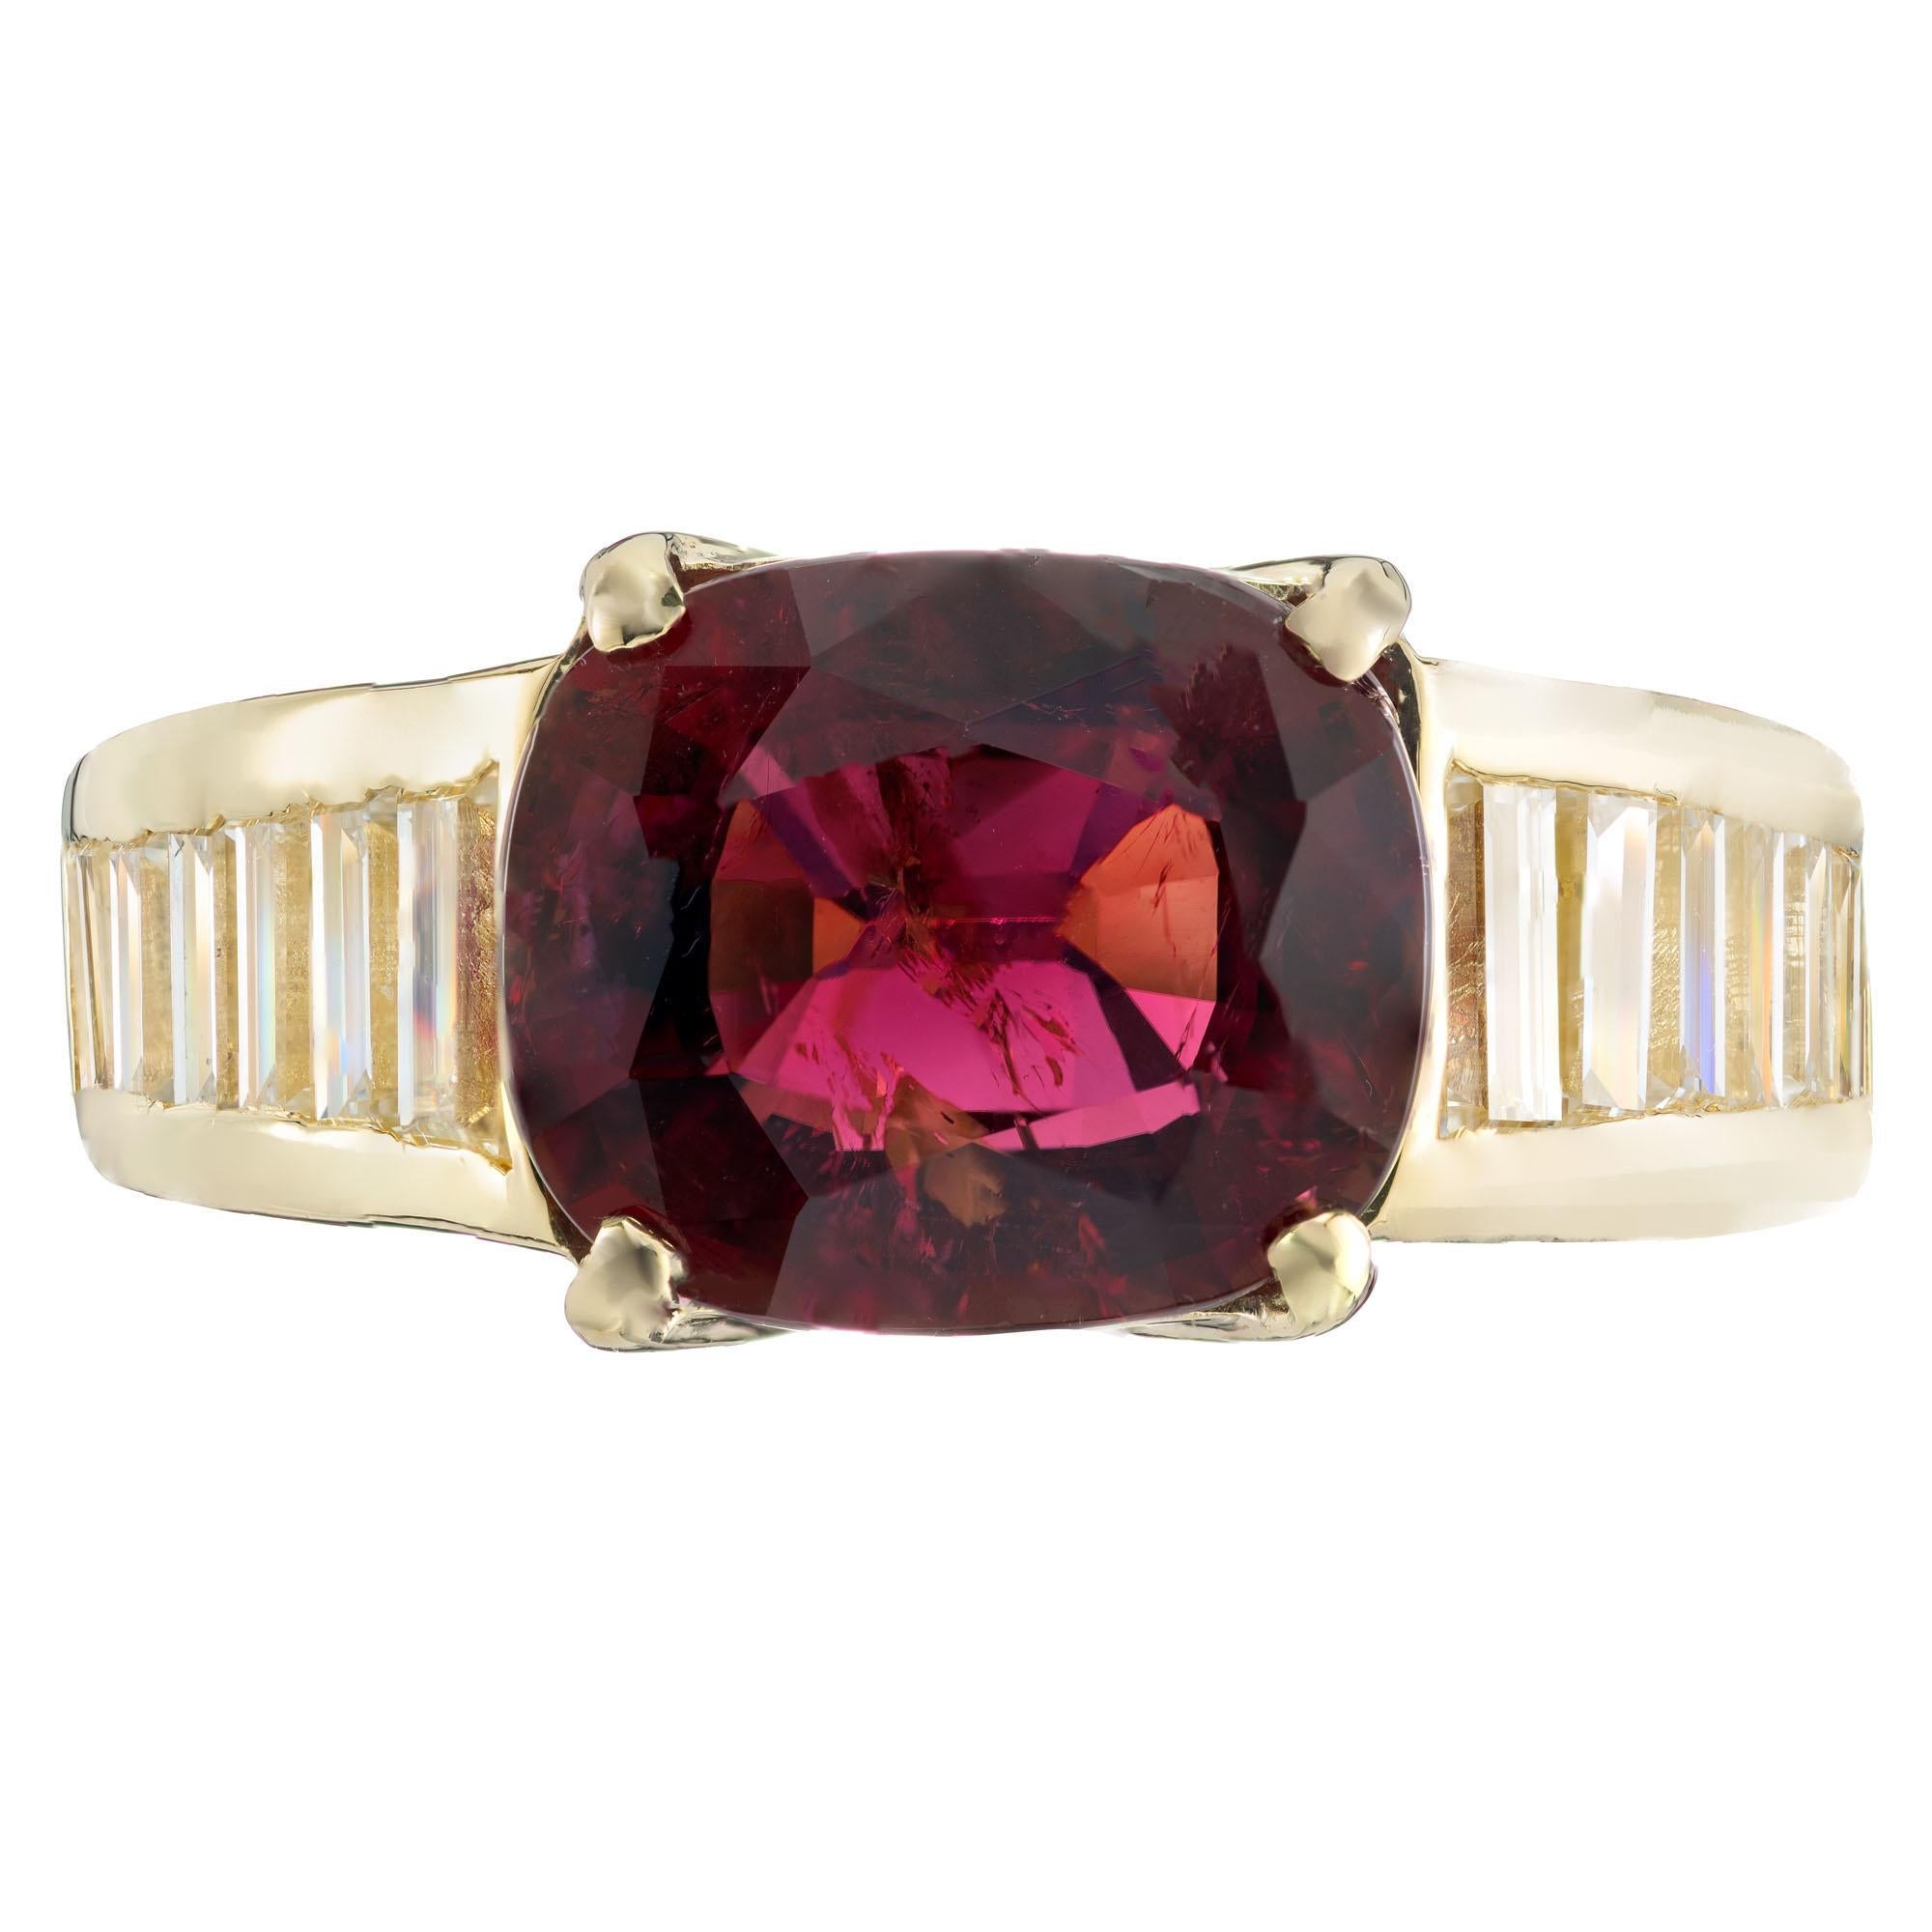 4.12 carat cushion shape red tourmaline rubellite. 18k yellow gold setting with straight cut baguette side diamonds. 

1 cushion shape rubellite reddish pink tourmaline SI2, approx. 4.12ct
14 straight cut baguette diamonds I-J VS, approx.